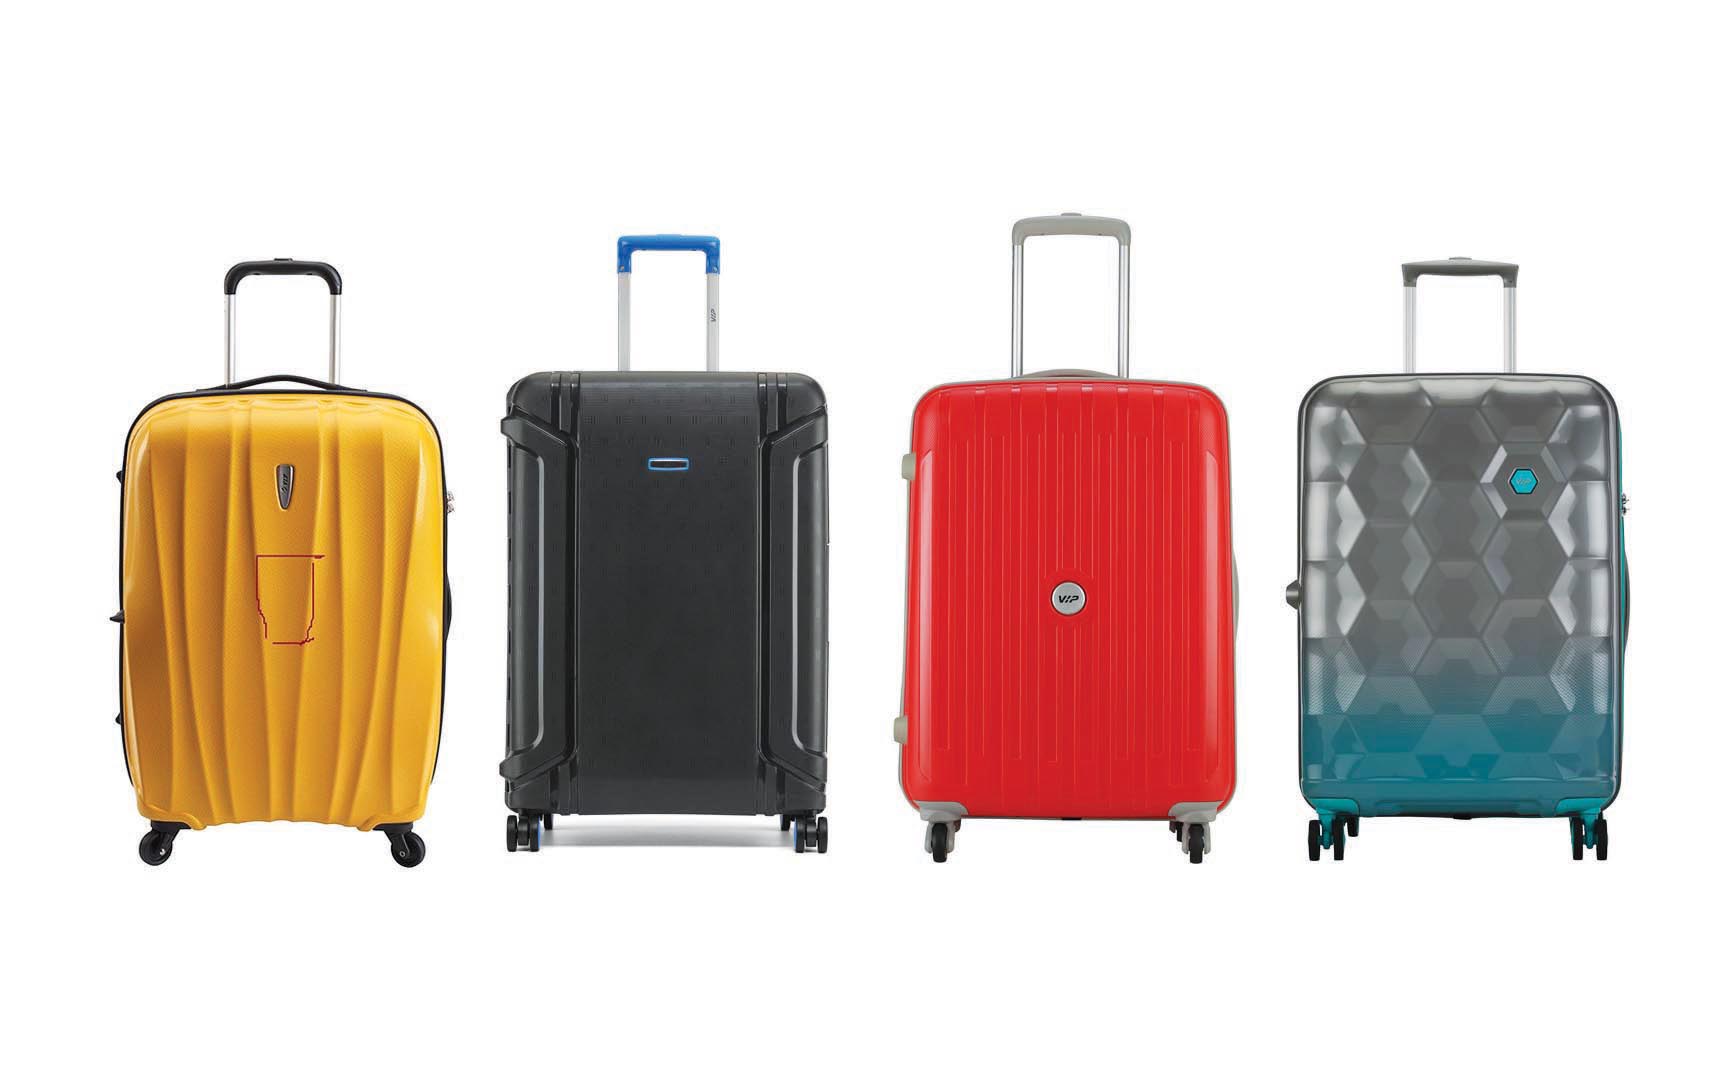 VIP NEOLITE STROLLY 65 360 (VIP) FIR Check-in Suitcase - 25 inch Red -  Price in India | Flipkart.com